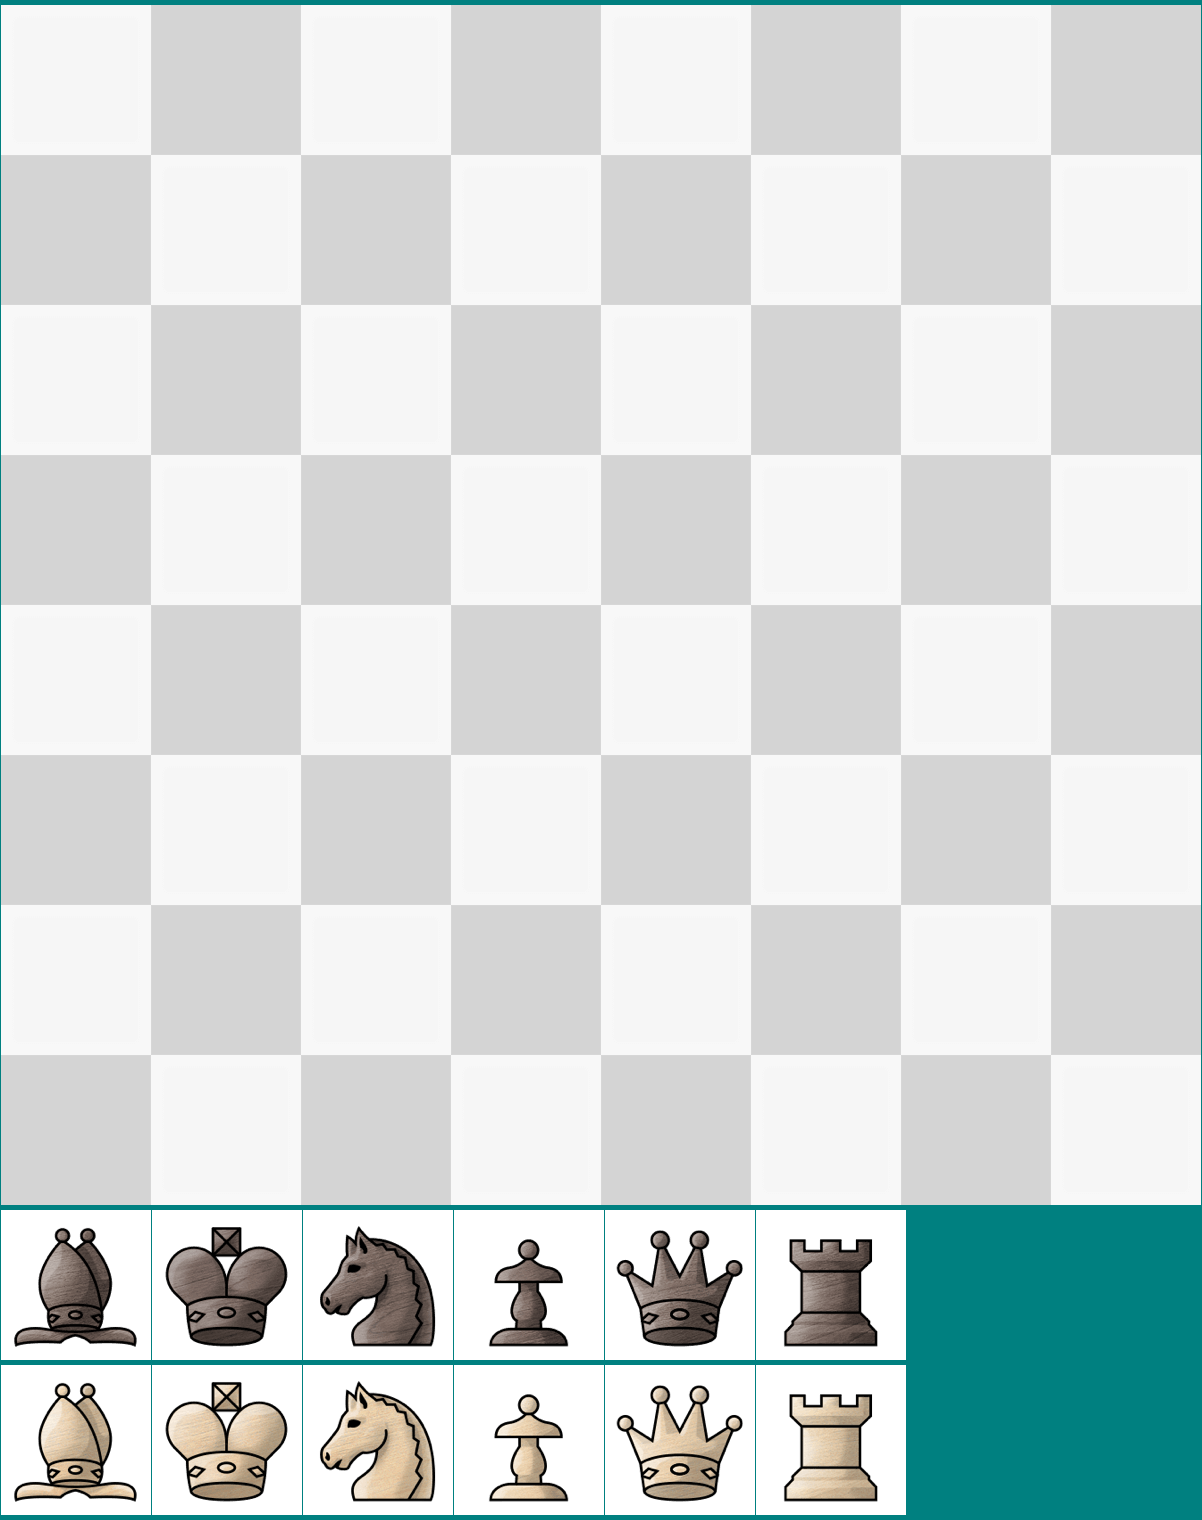 Board and Chess Pieces (Nature)